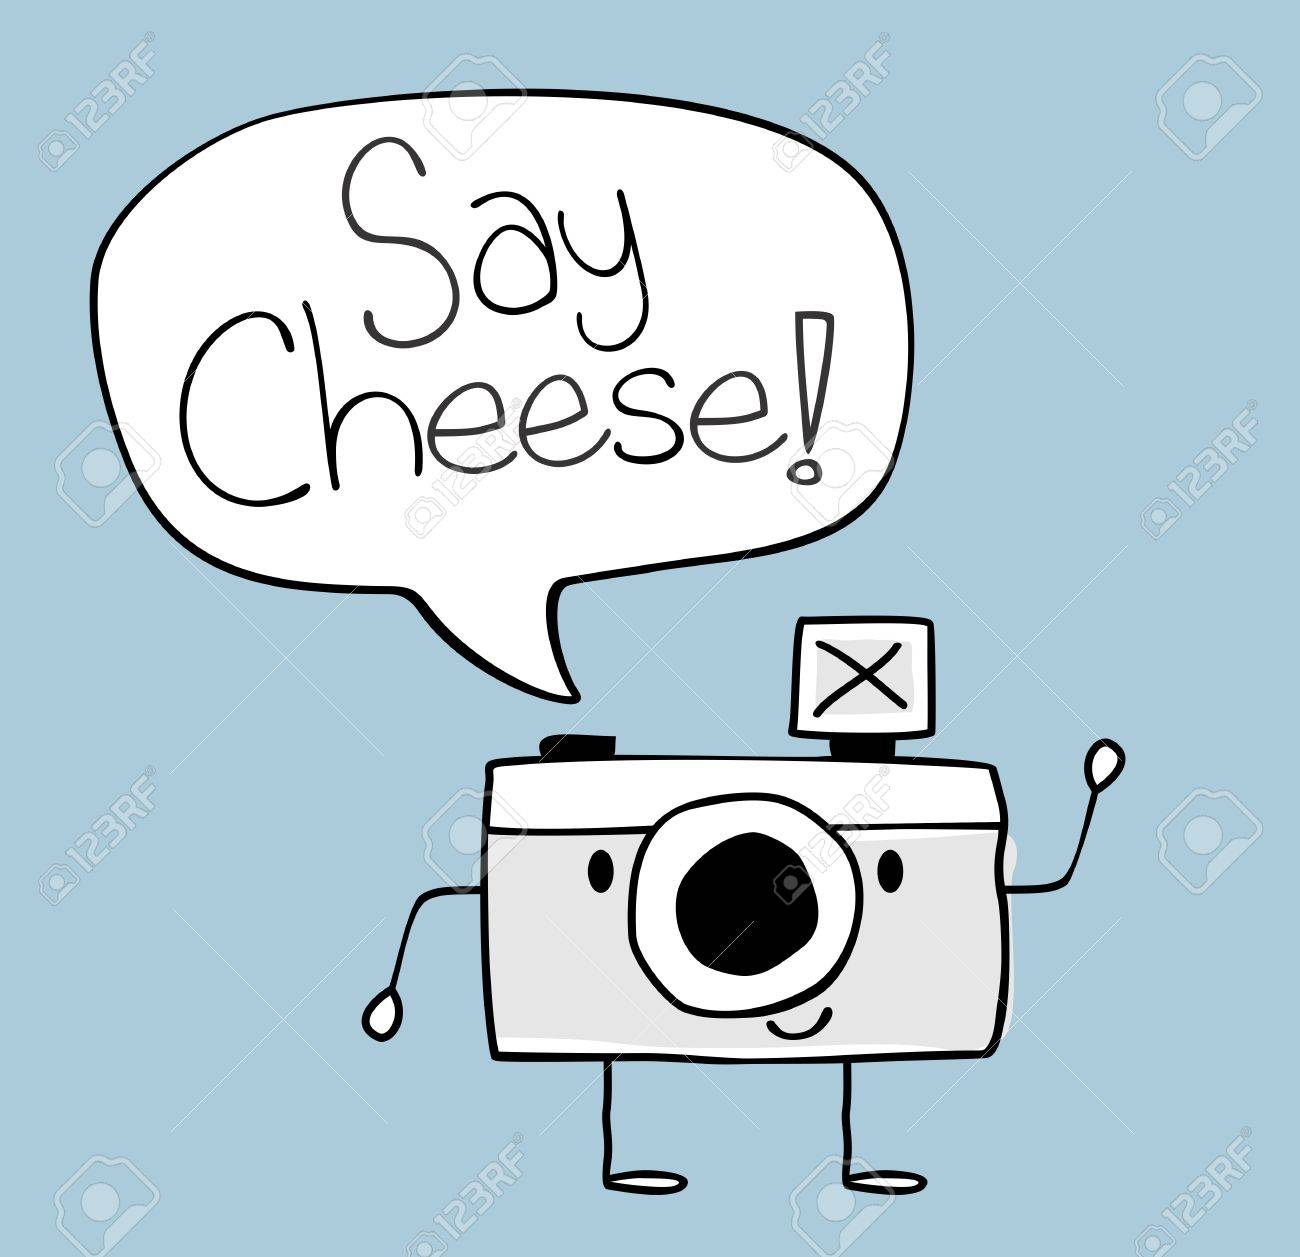 21450190-cute-funny-camera-with-say-cheese-text-balloon-legs-and-arms-hand-drawn-on-solid-color-background-ea-Stock-Vector.jpg